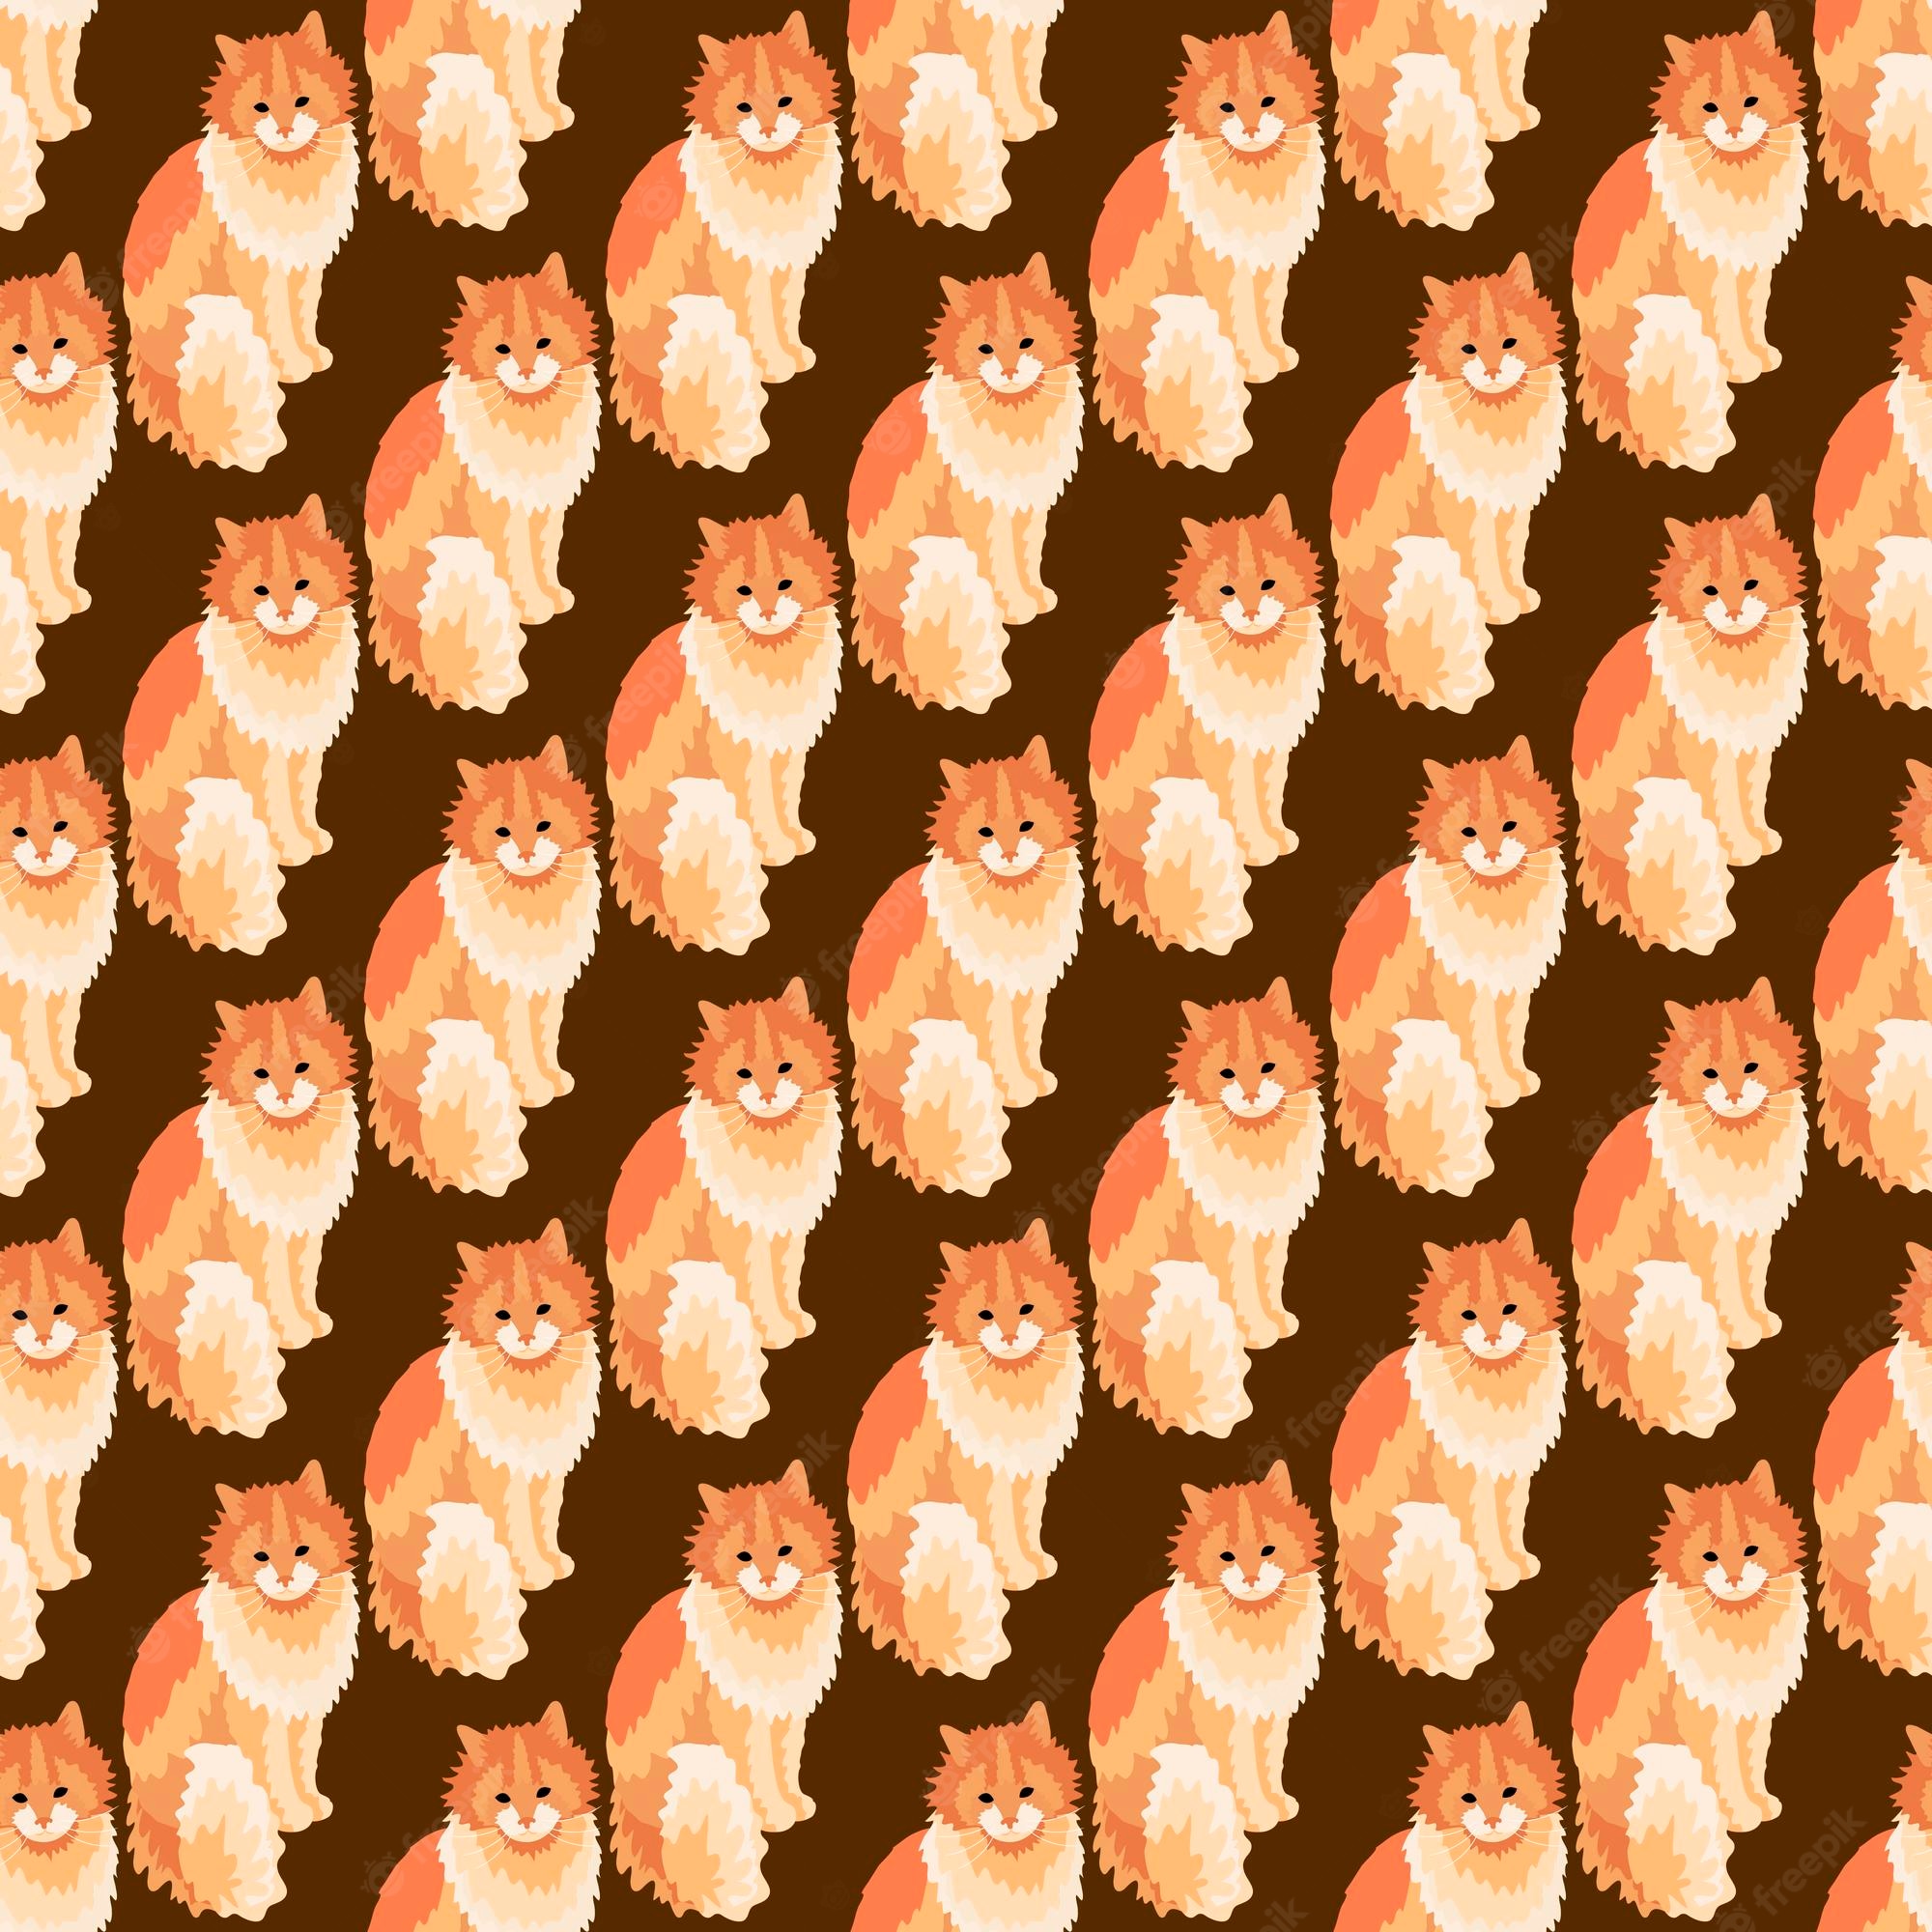 Premium Vector Seamless Pattern With Cats